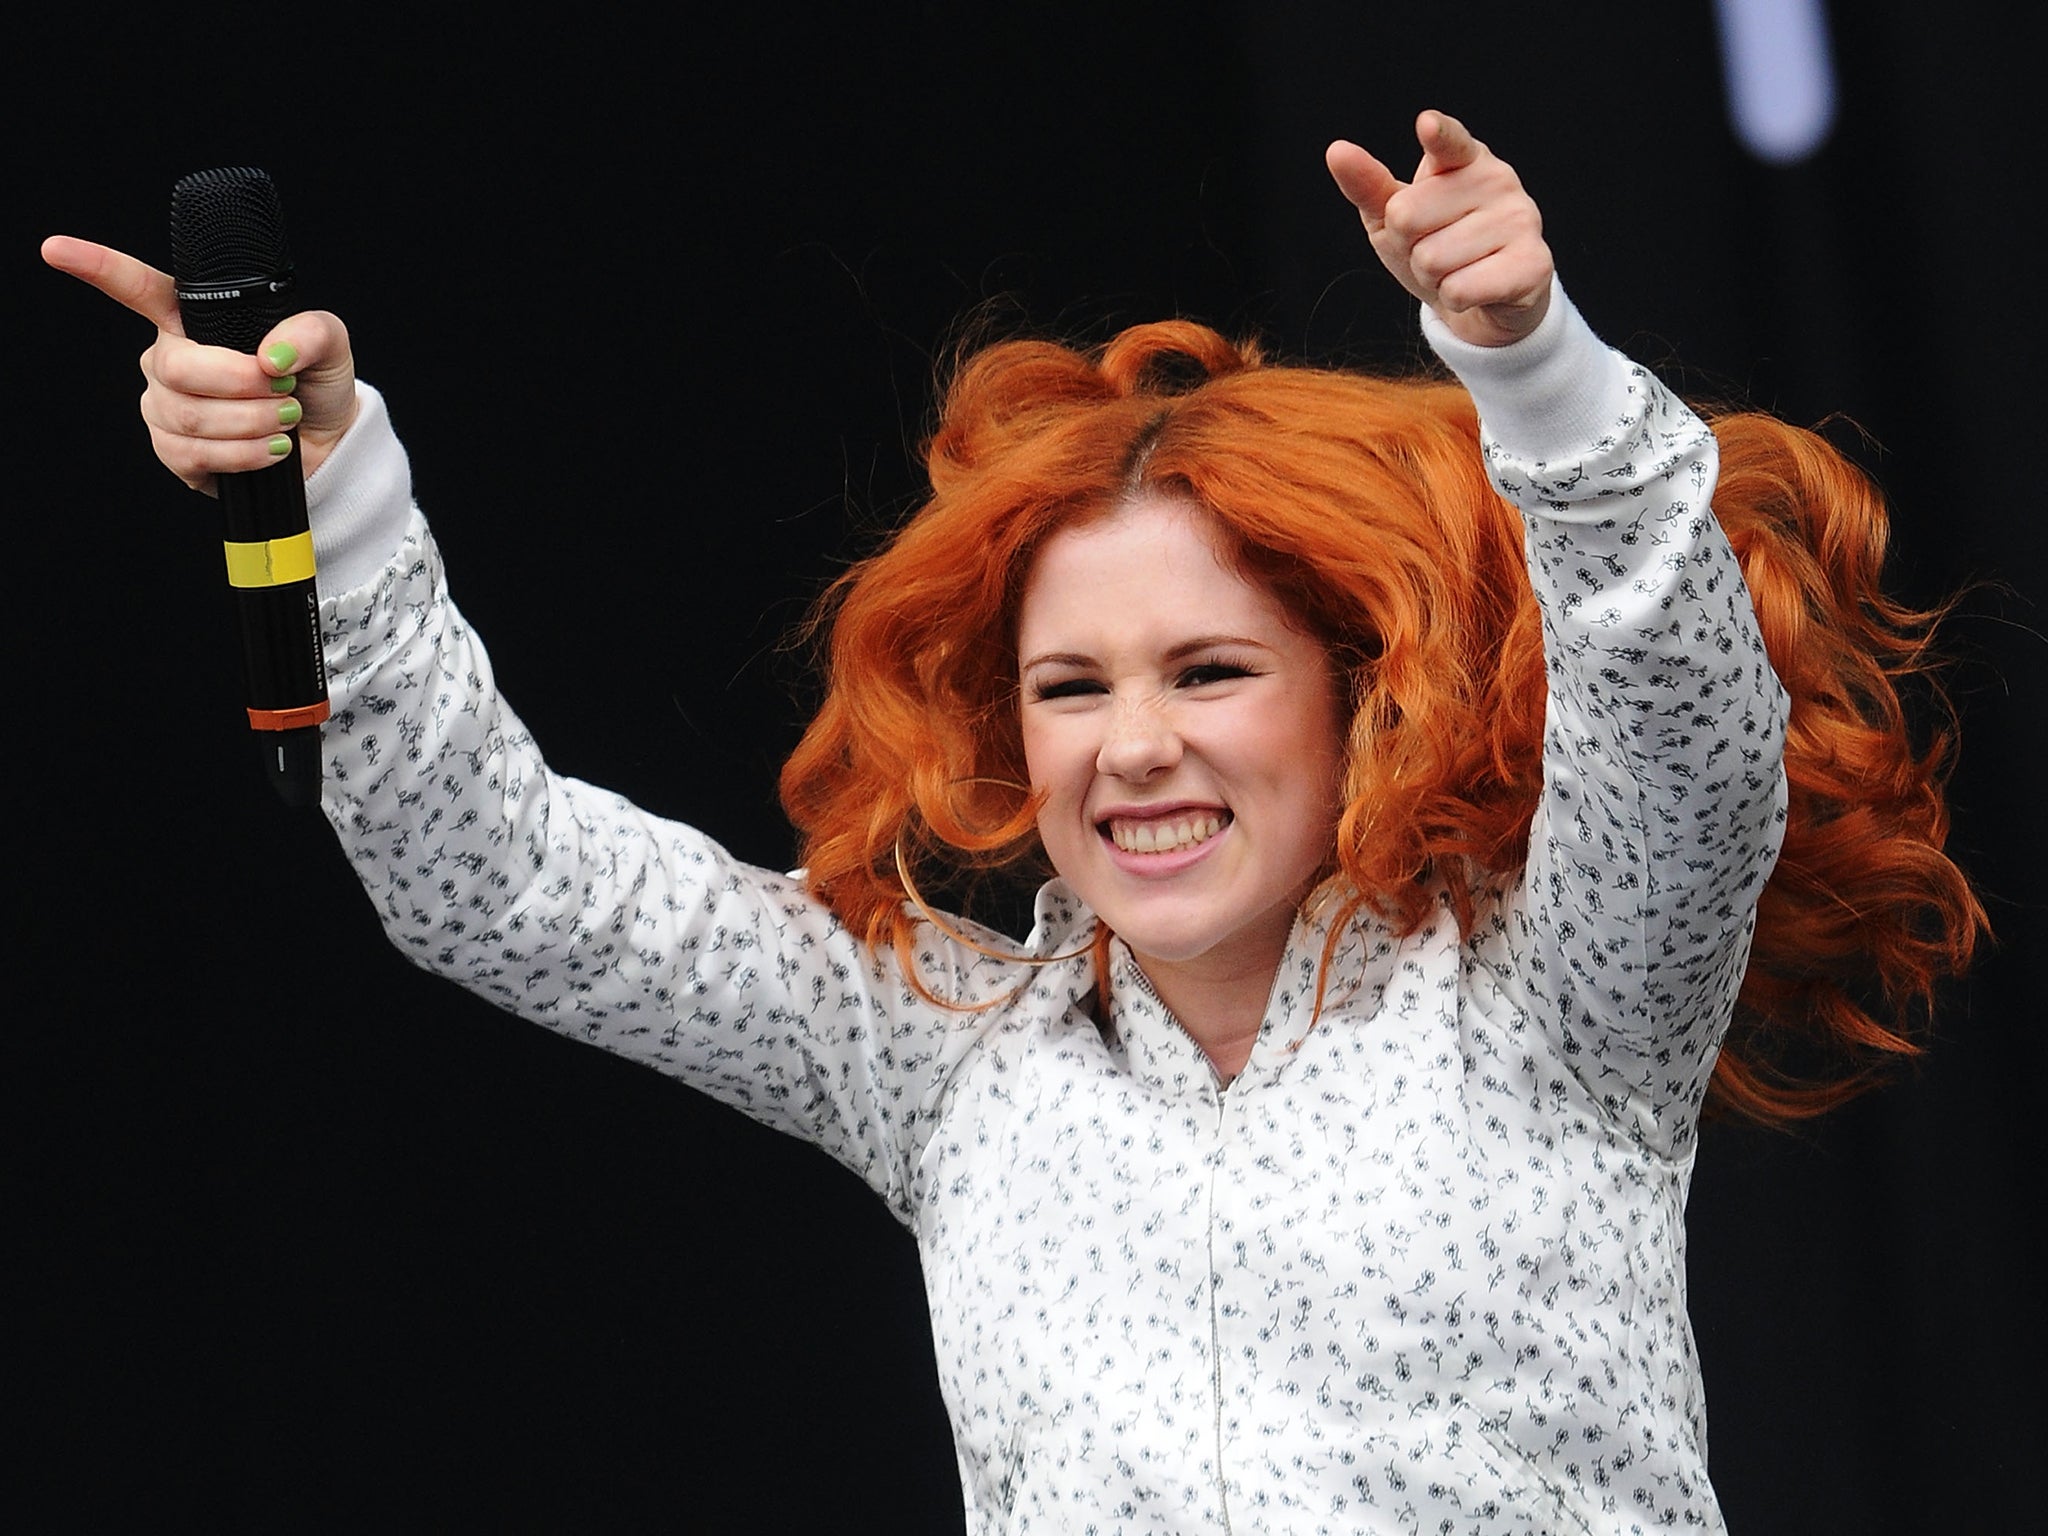 Katy B performs at Wireless Festival in July 2011